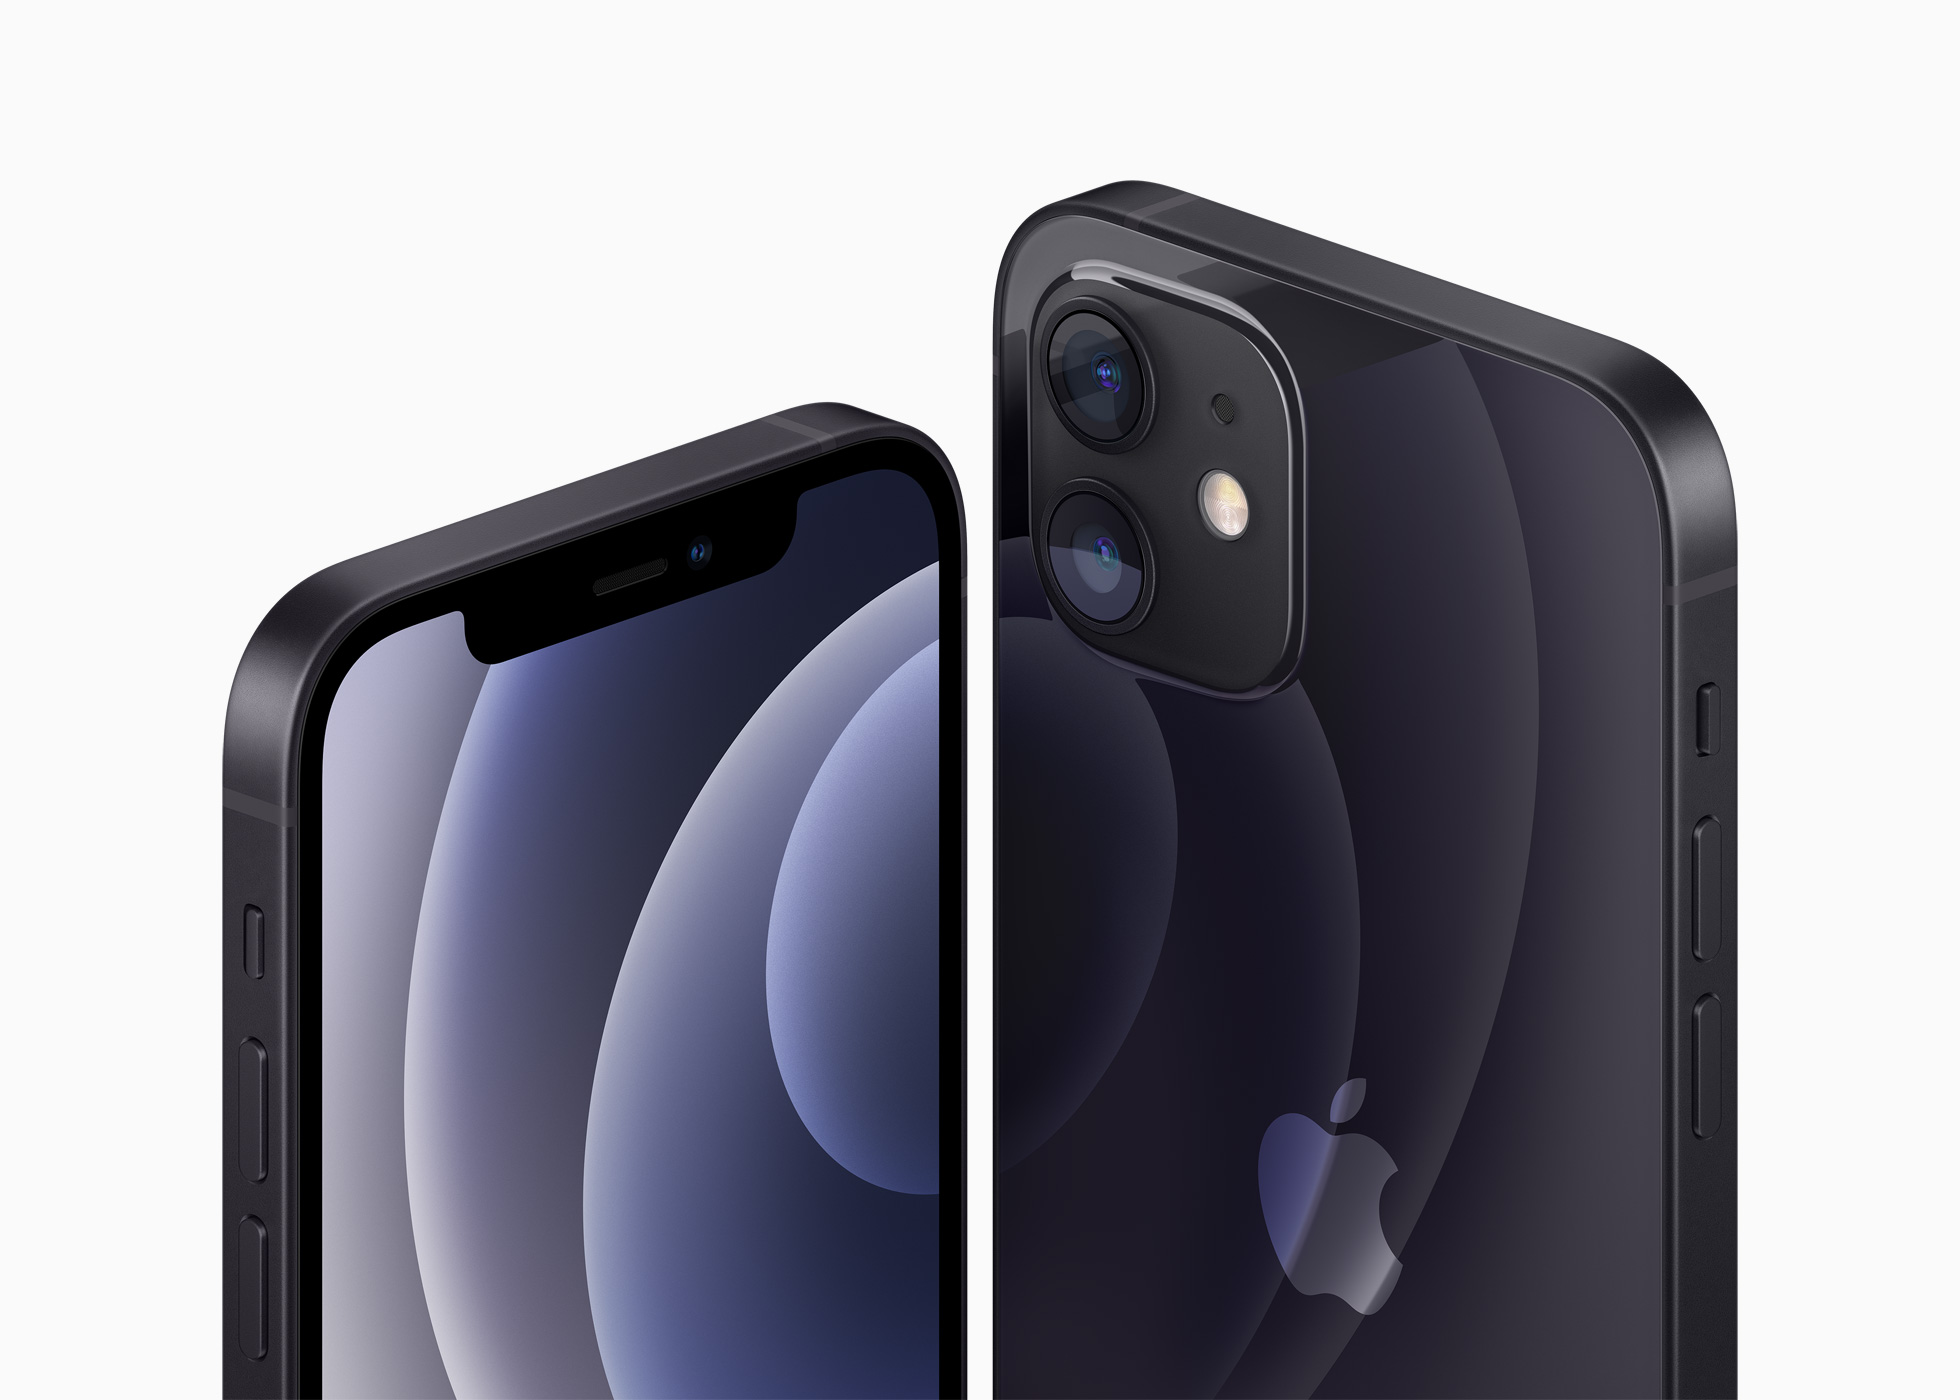 Ferie Anbefalede ankomme iPhone 12 offers a big Personal Hotspot advantage over iPhone 11 | iMore